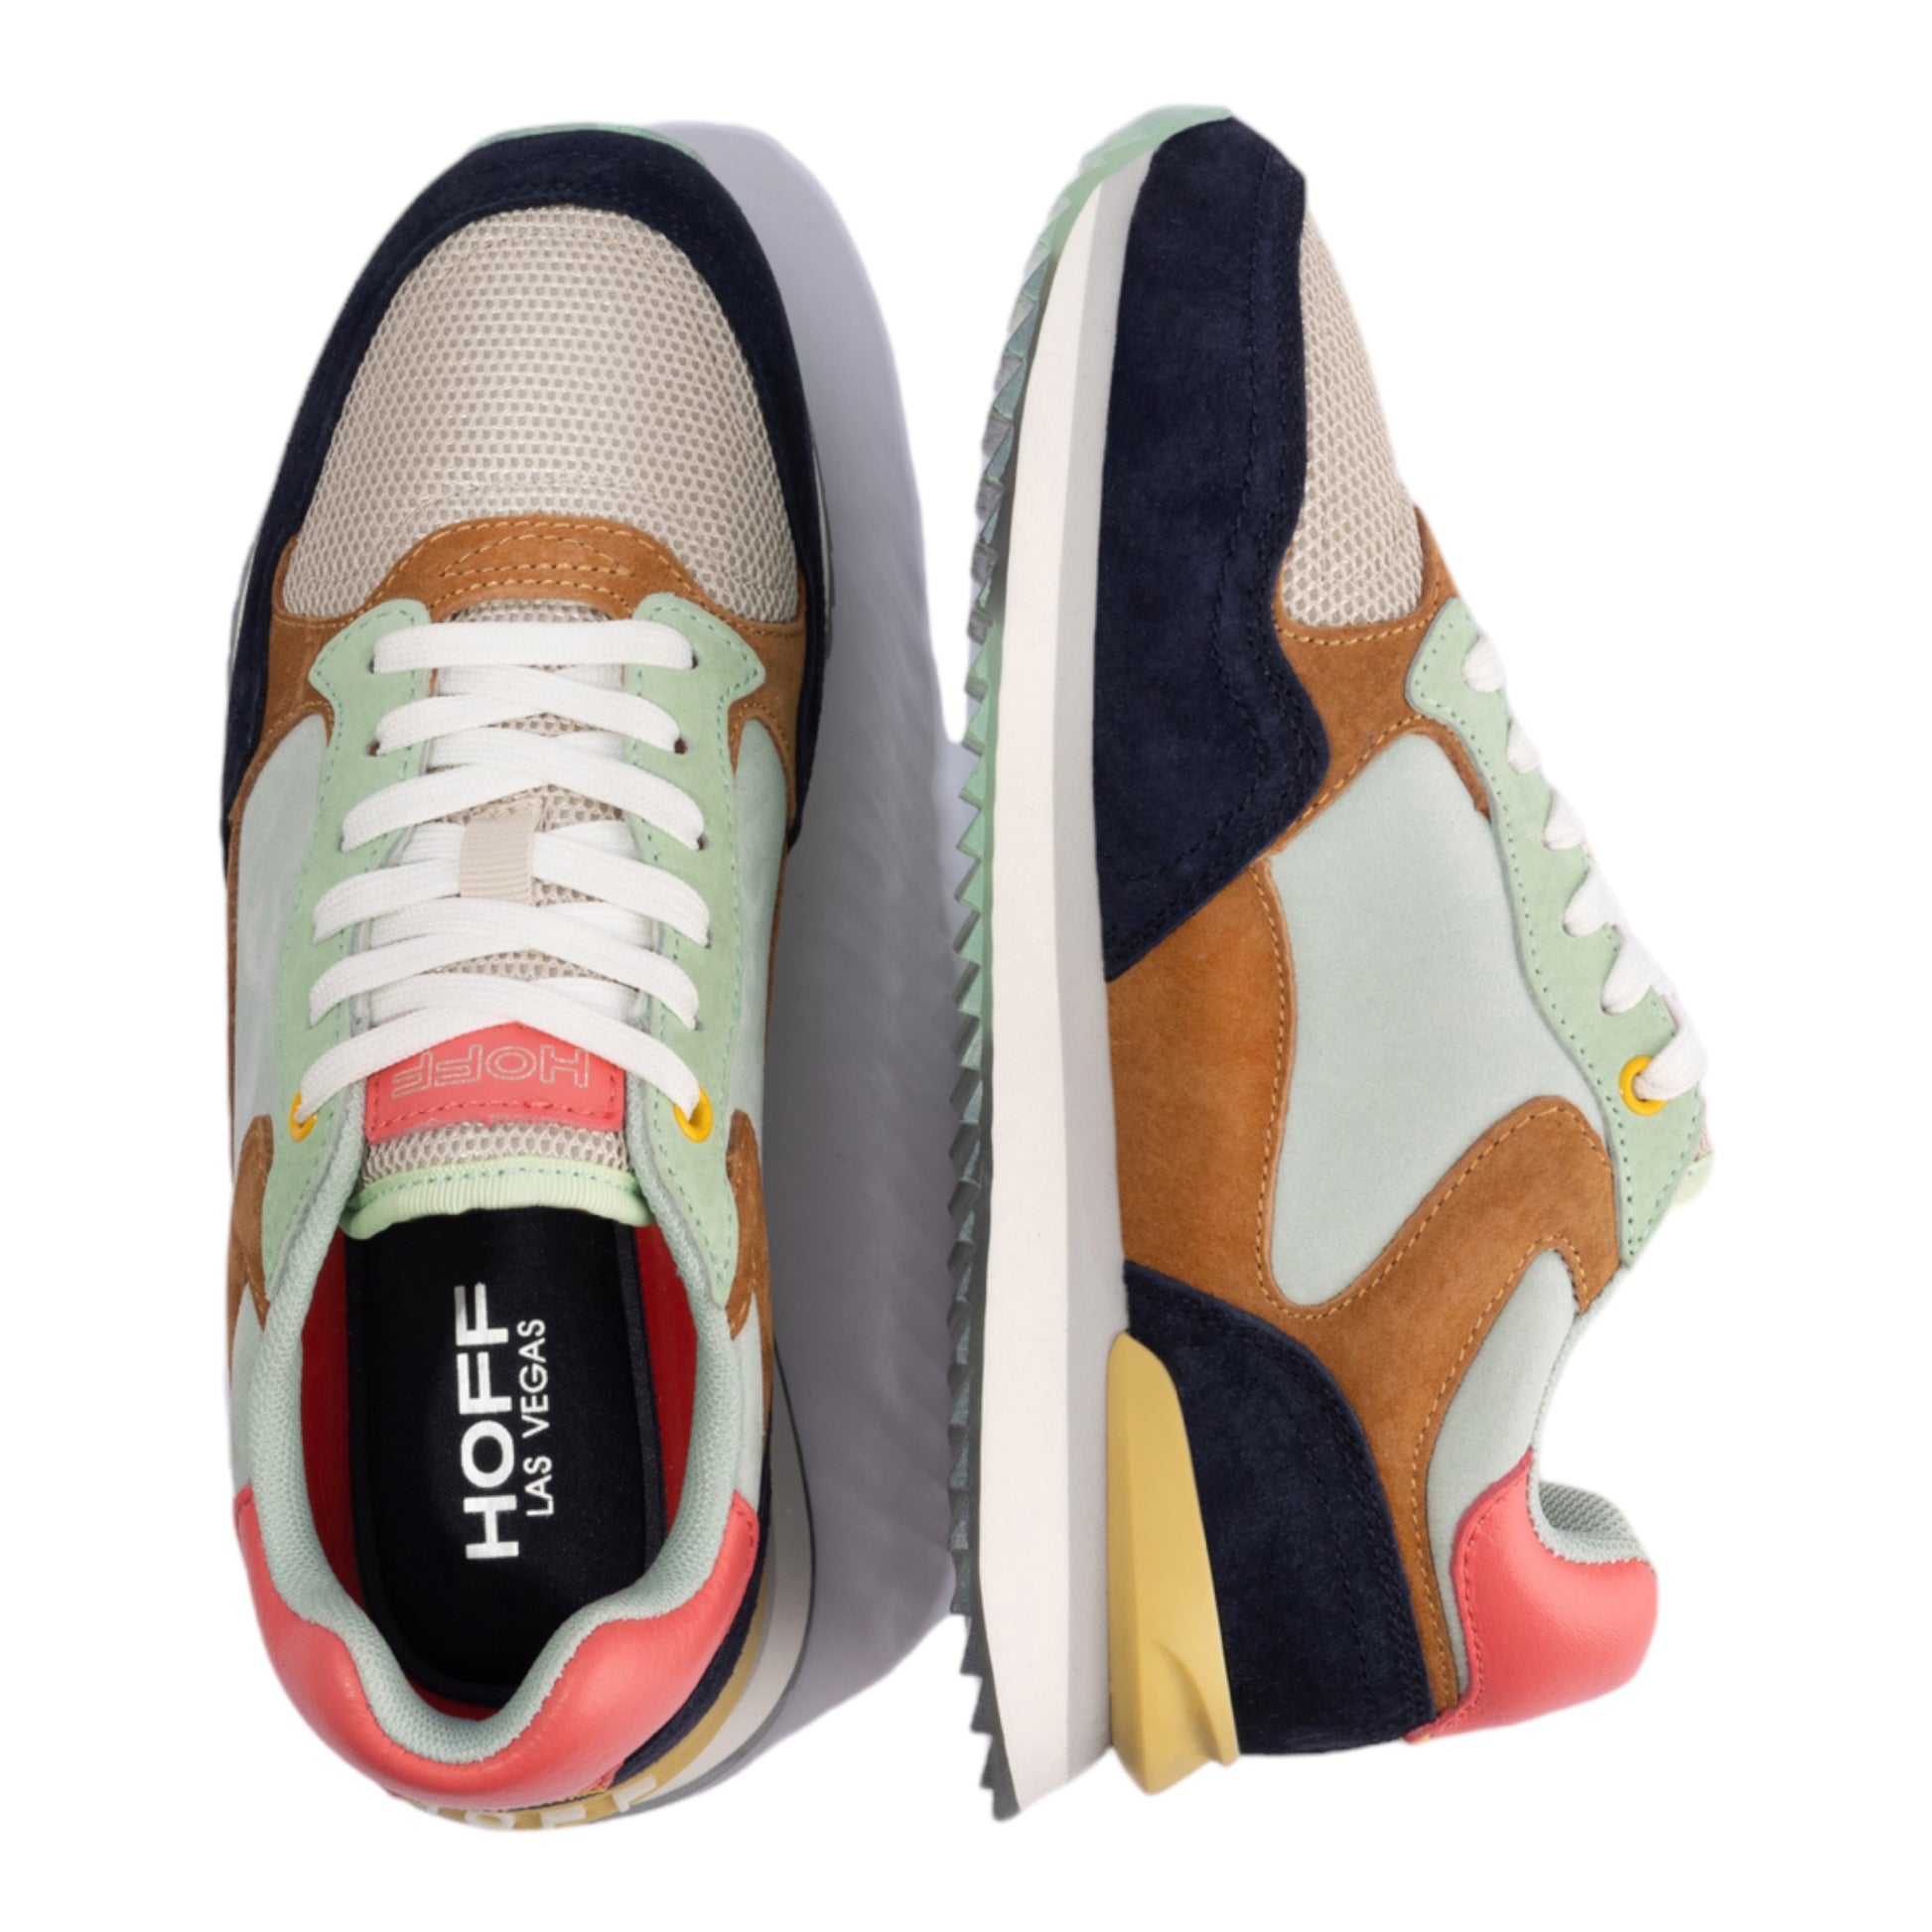 Conker Boutique Hoff Las Vegas Trainers side and top view